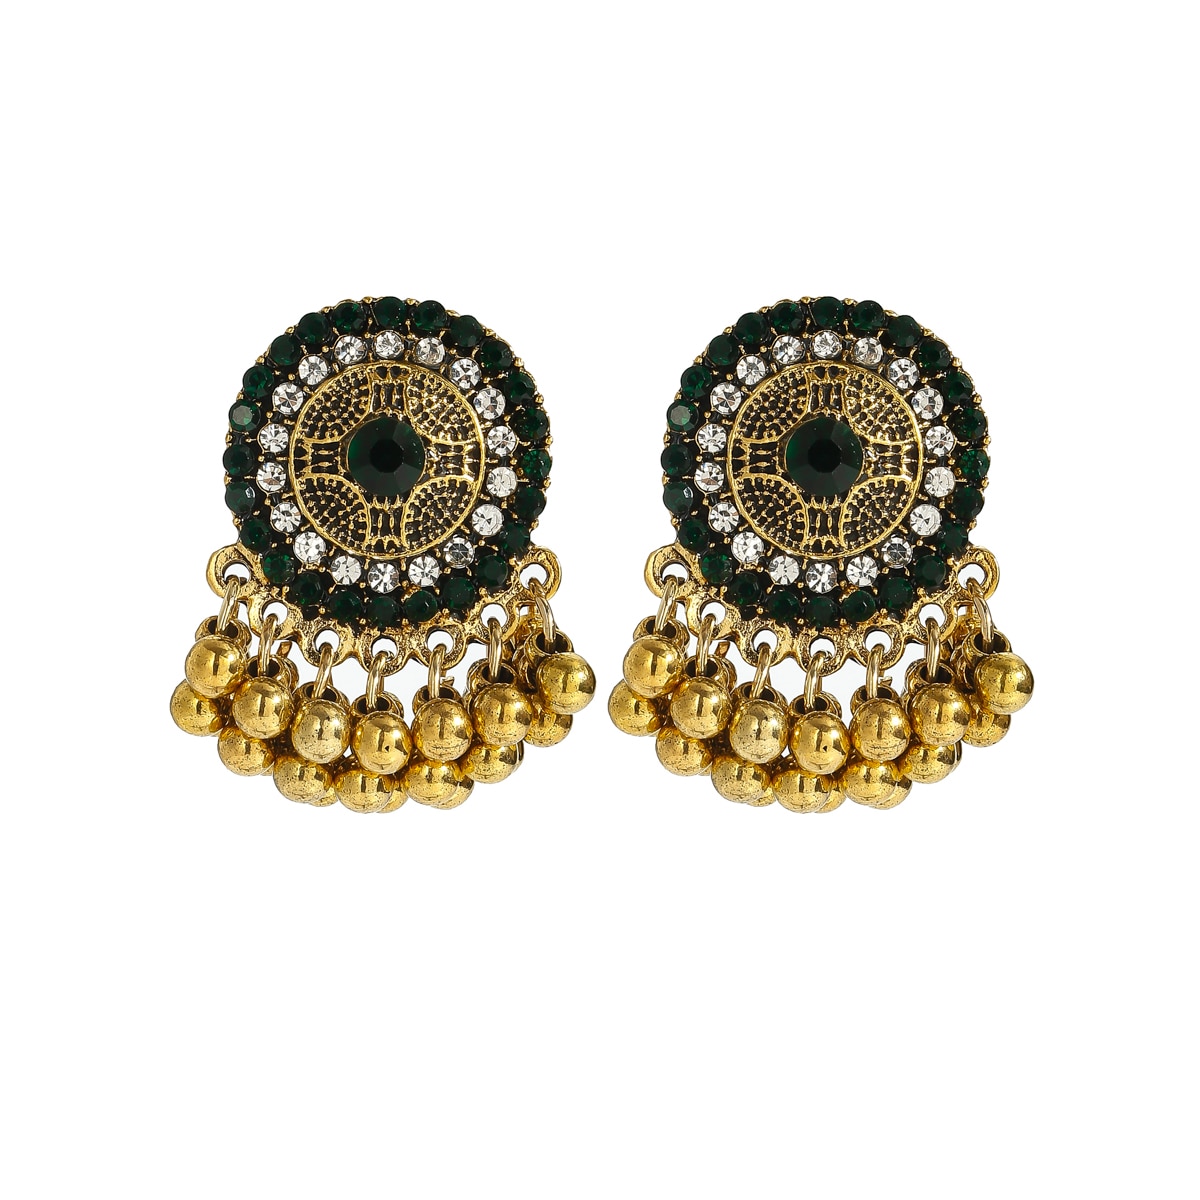 Classic-Ethnic-CZ-Indian-Earrings-For-Women-Gypsy-Round-Alloy-Jhumka-Earring-Fashion-Jewelry-Orecchi-3256804584391767-6